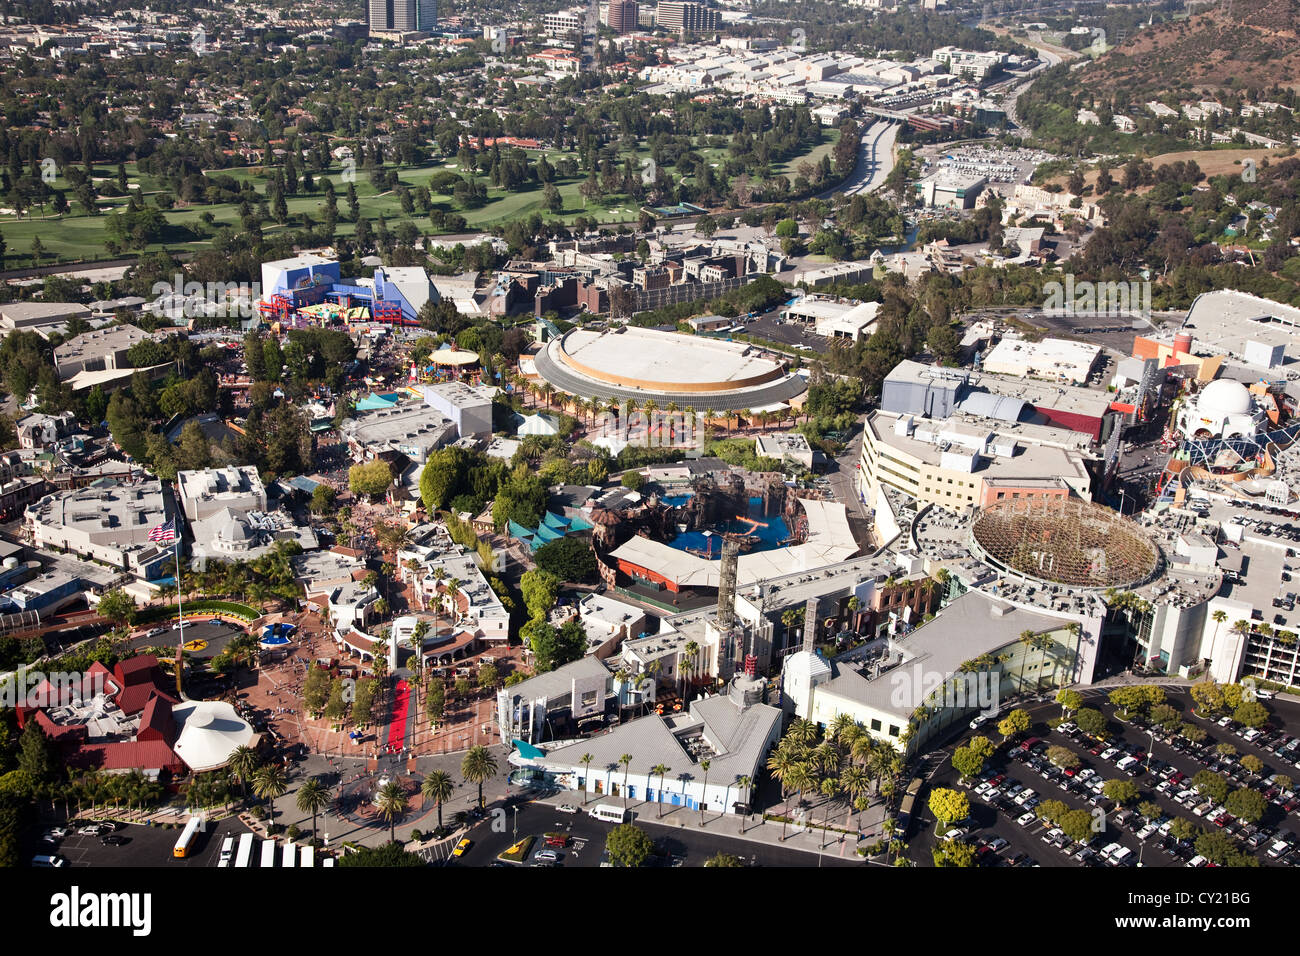 Universal Studios in the Hollywood Hills, Los Angeles, California. Stock Photo